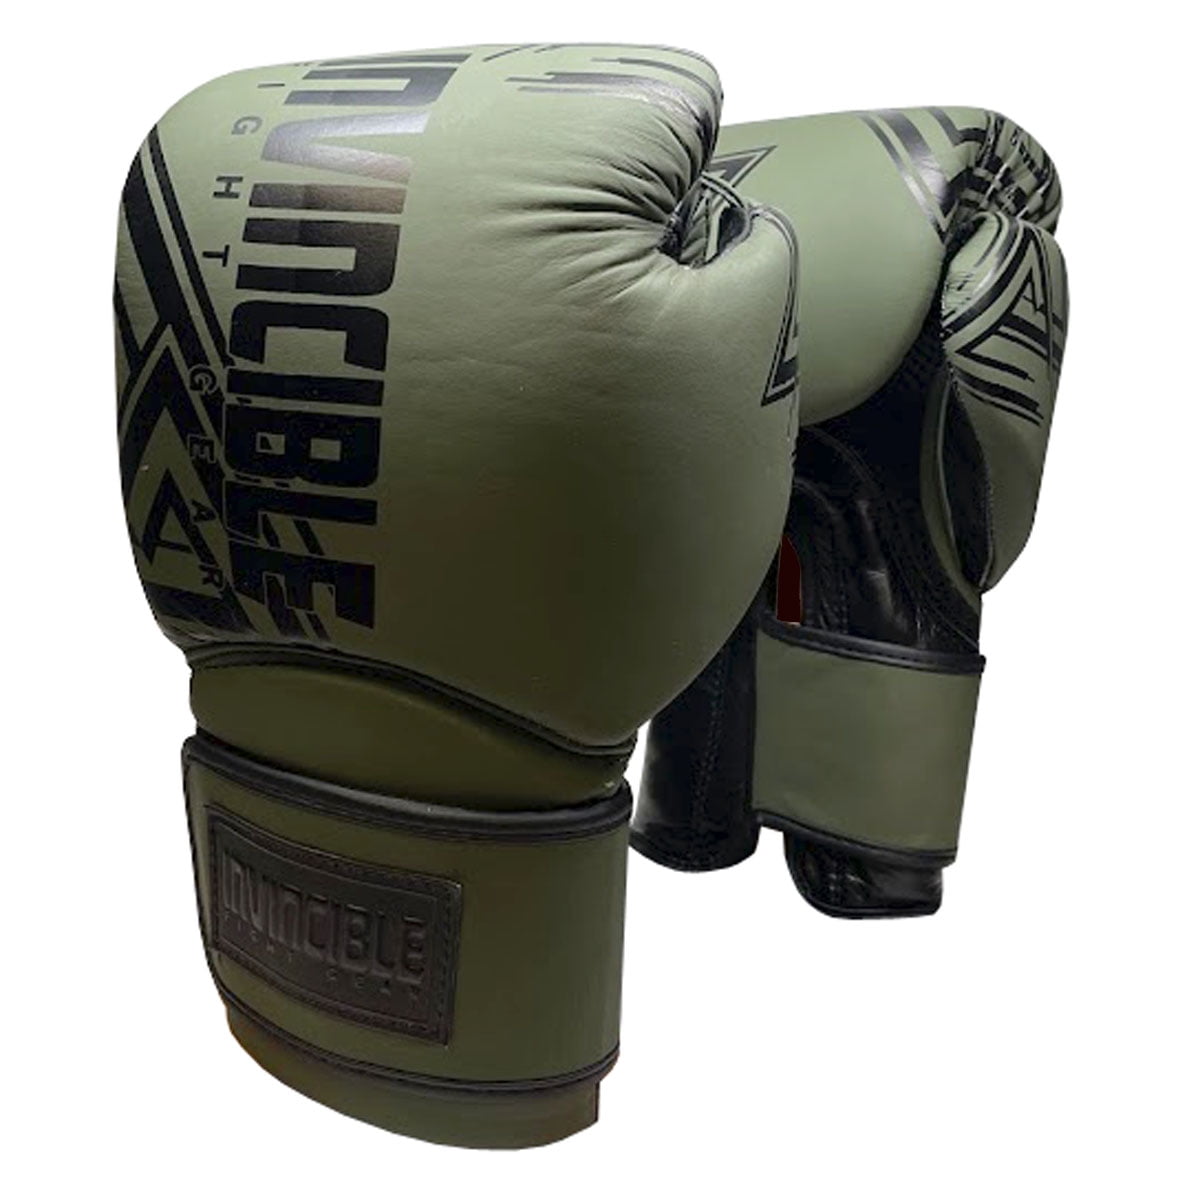 VELO Boxing Gloves Punch Training Sparring Mitts Hand Fight Muay Thai Wraps 